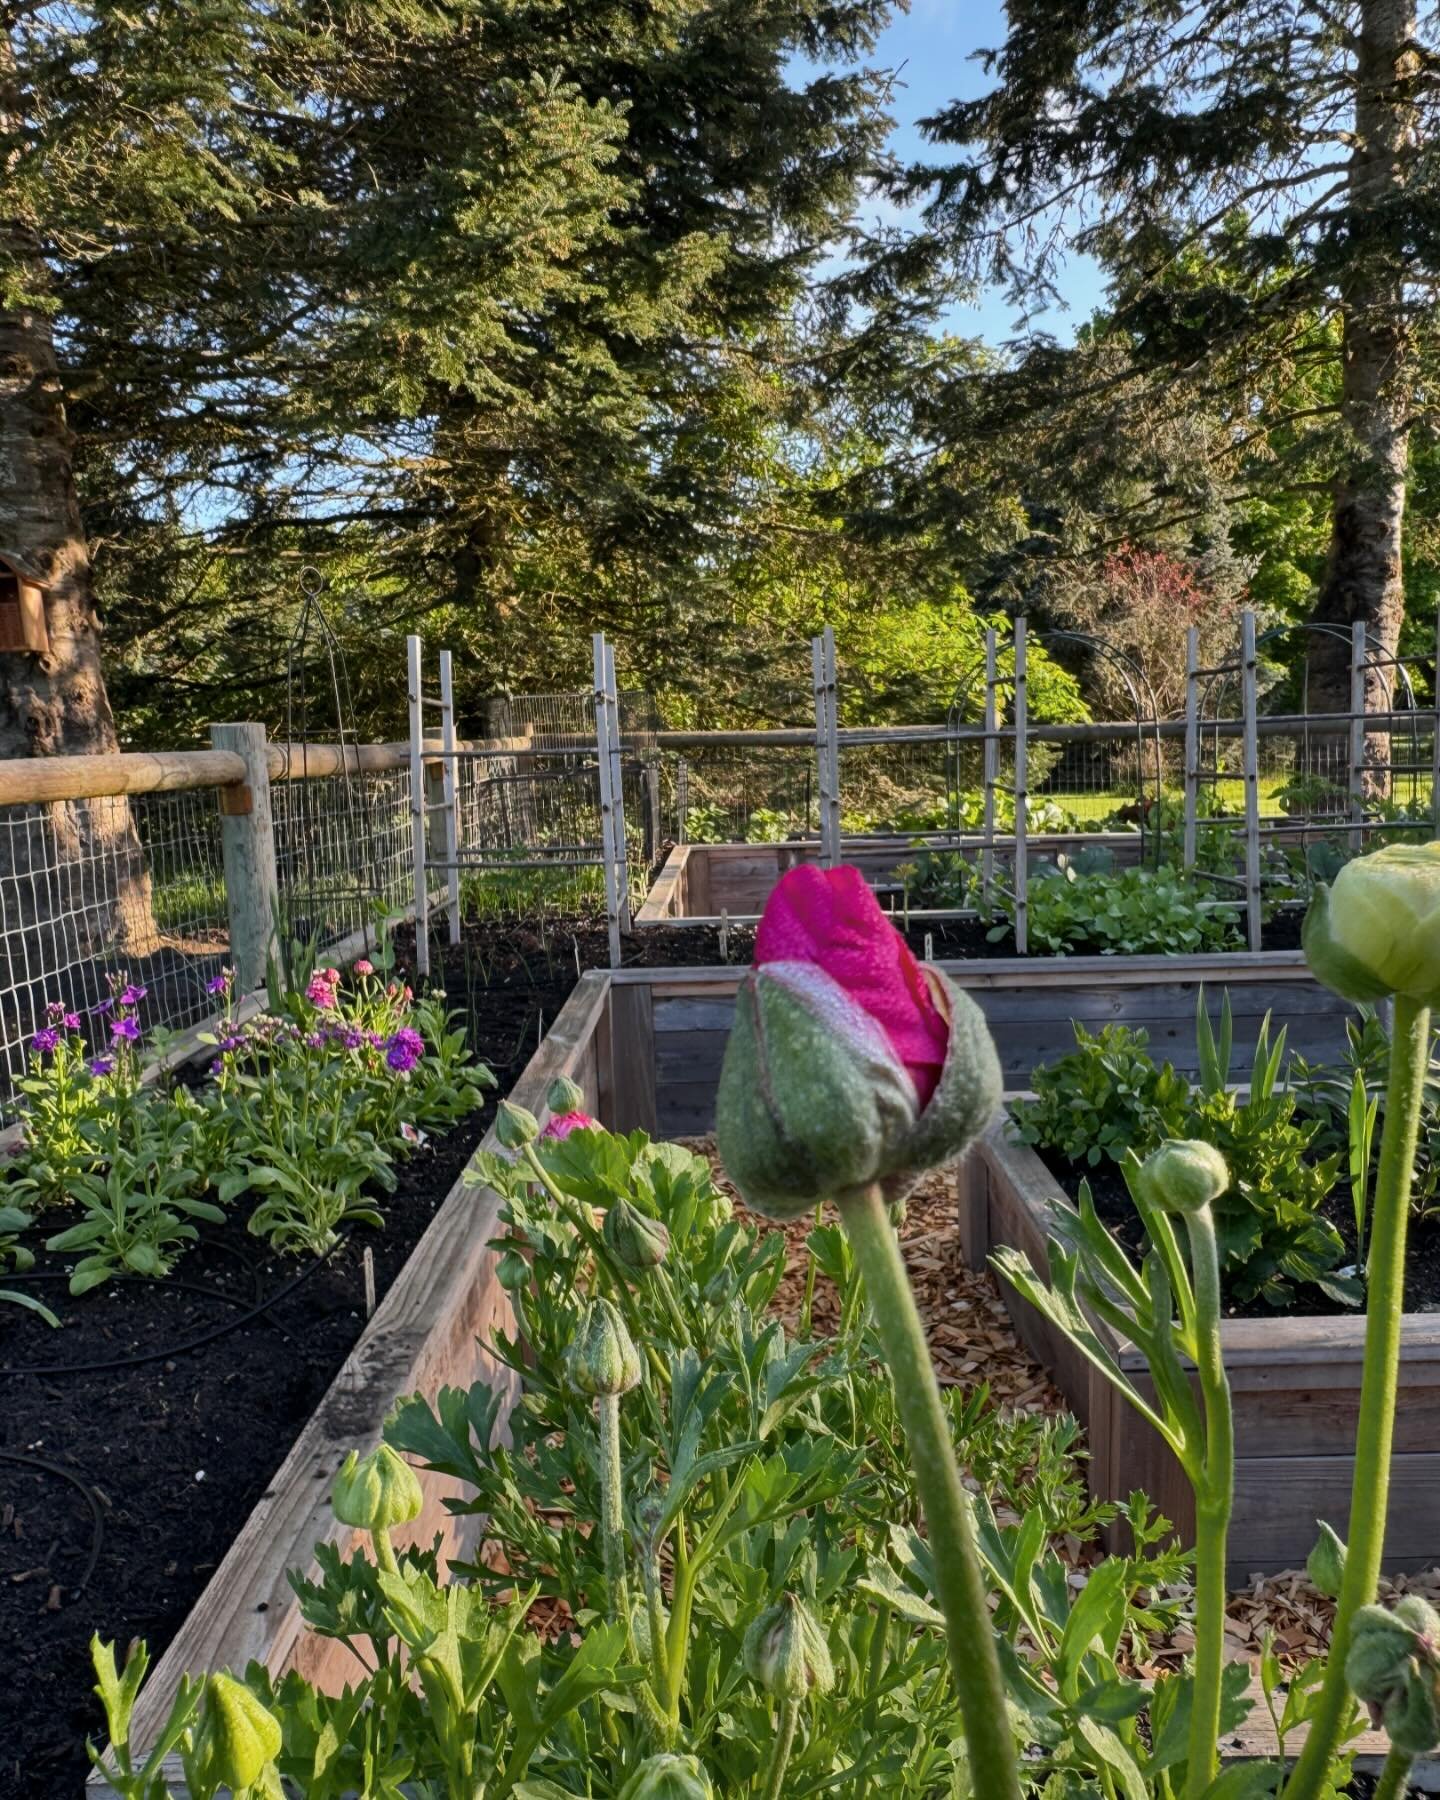 Today&rsquo;s garden tour brought to you by the SUNSHINE! ☀️